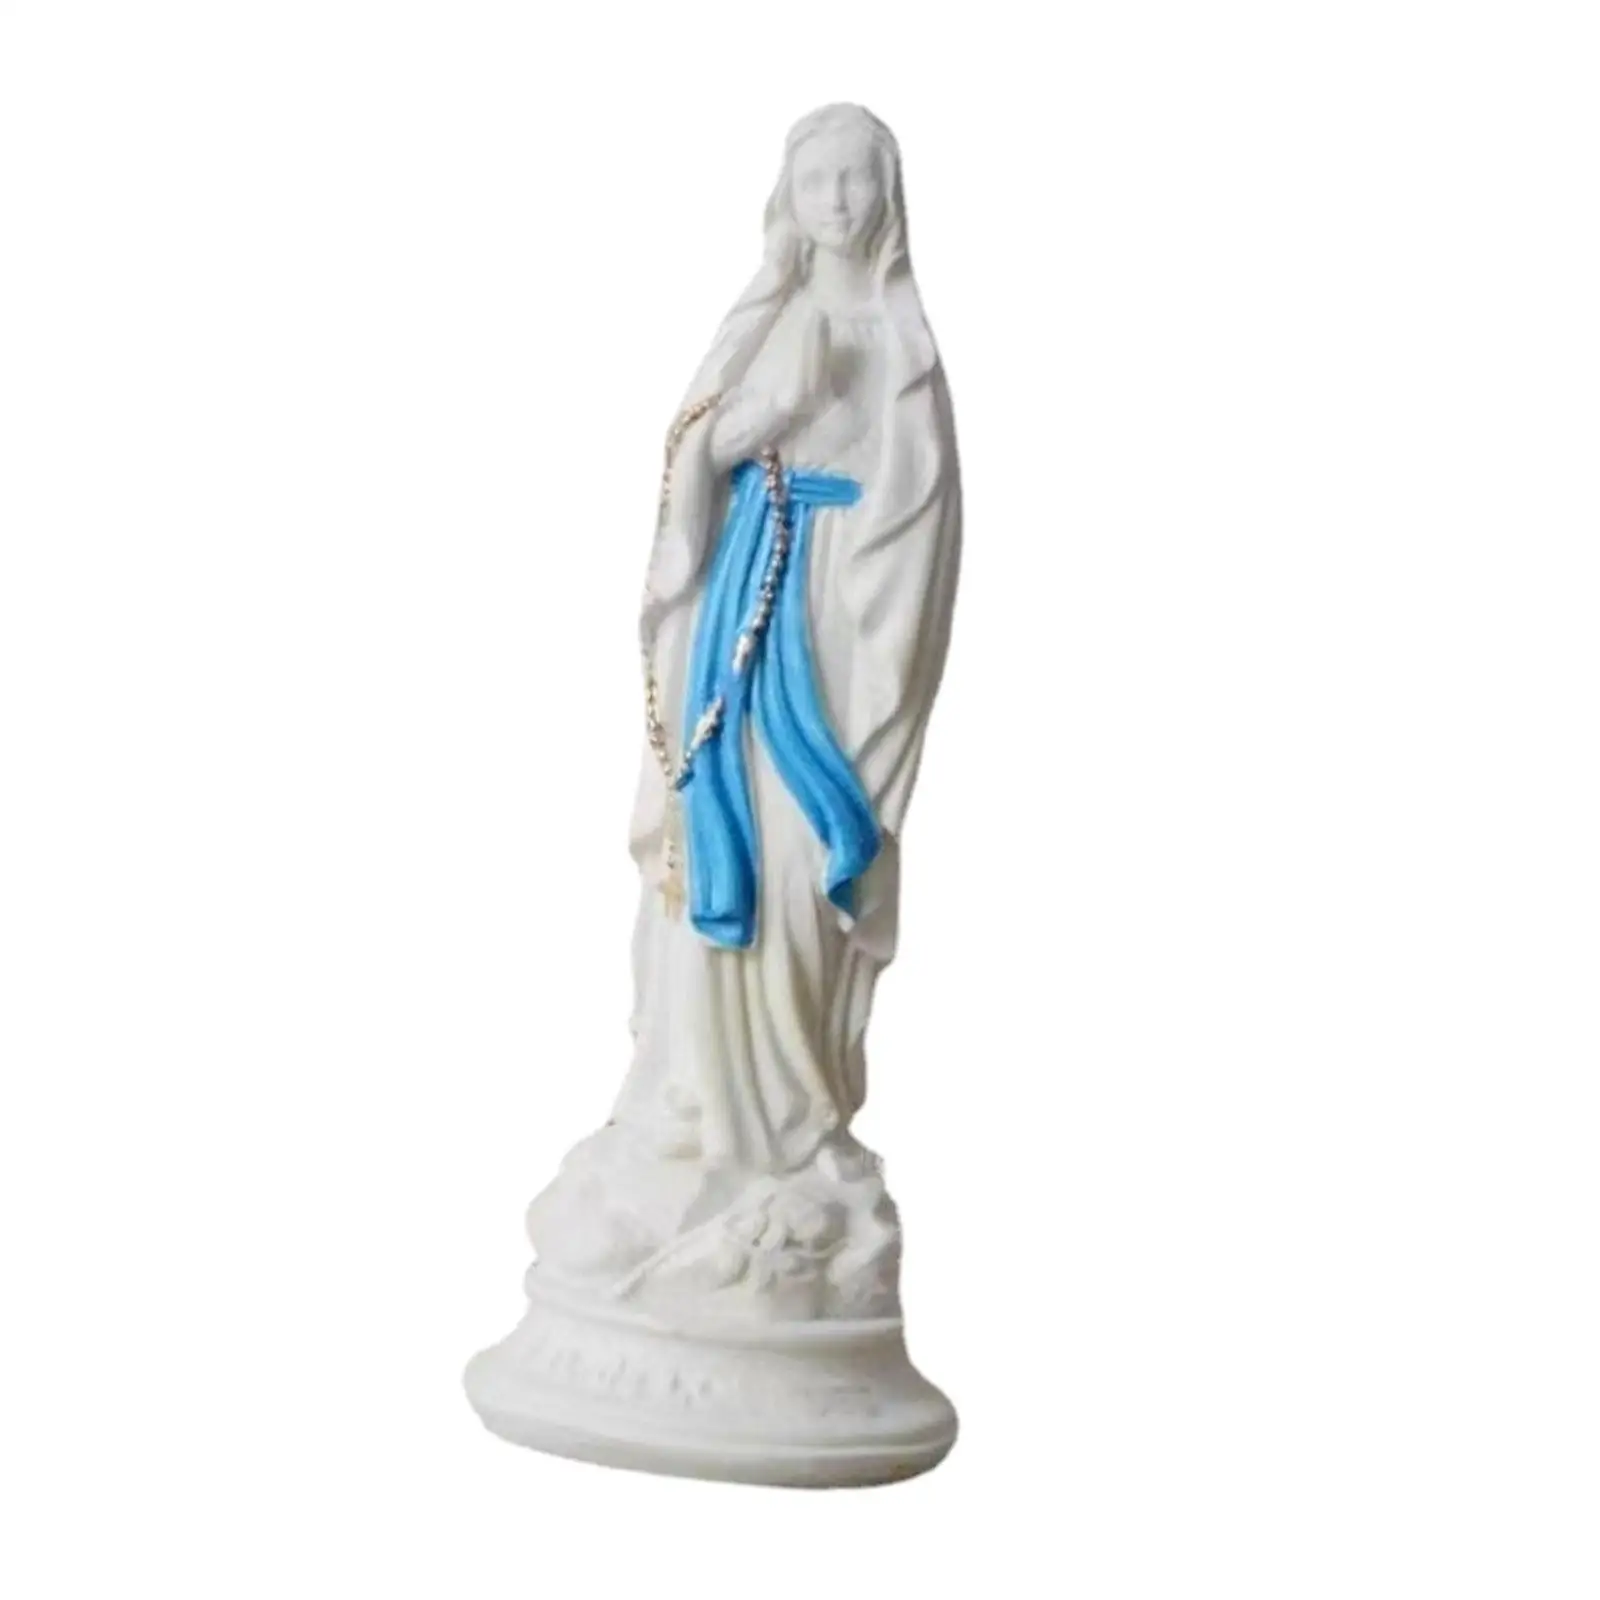 Holy Mother Figurine Virgin Mother Mary Statue Mary Statue 5.5